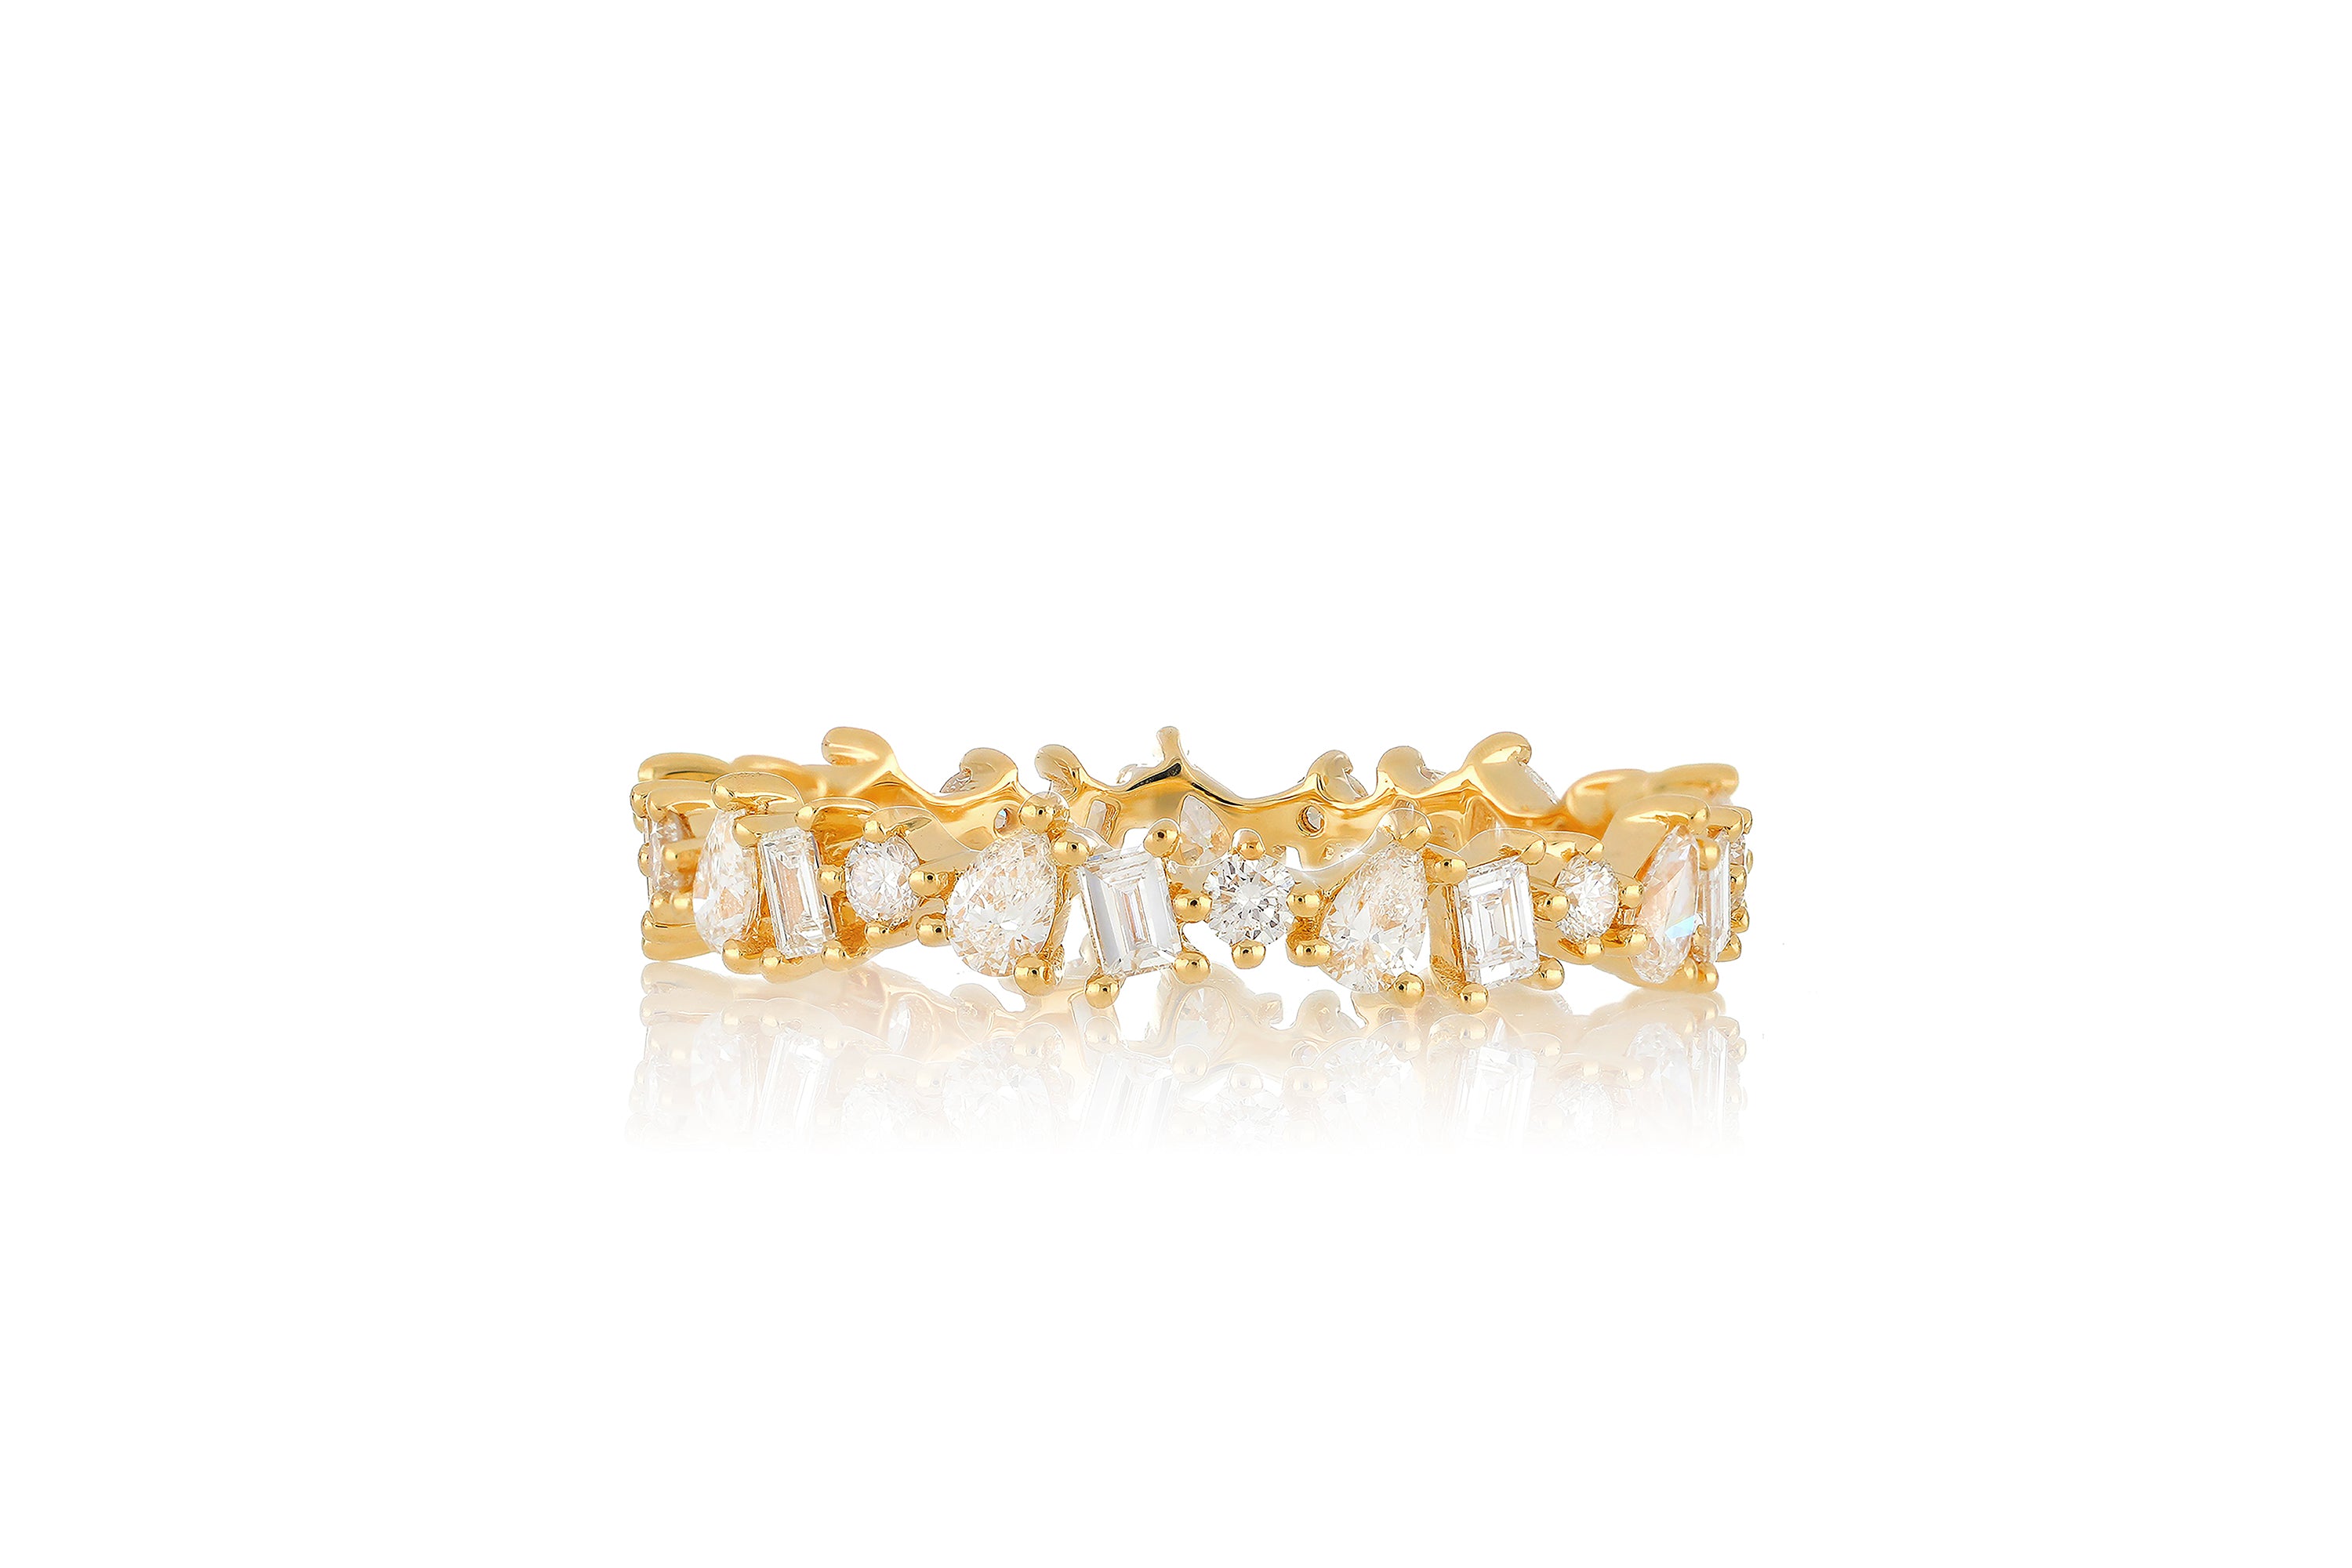 14k yellow gold multi faceted diamond ring with baguette diamonds, pear shaped diamonds, and round diamonds all around.